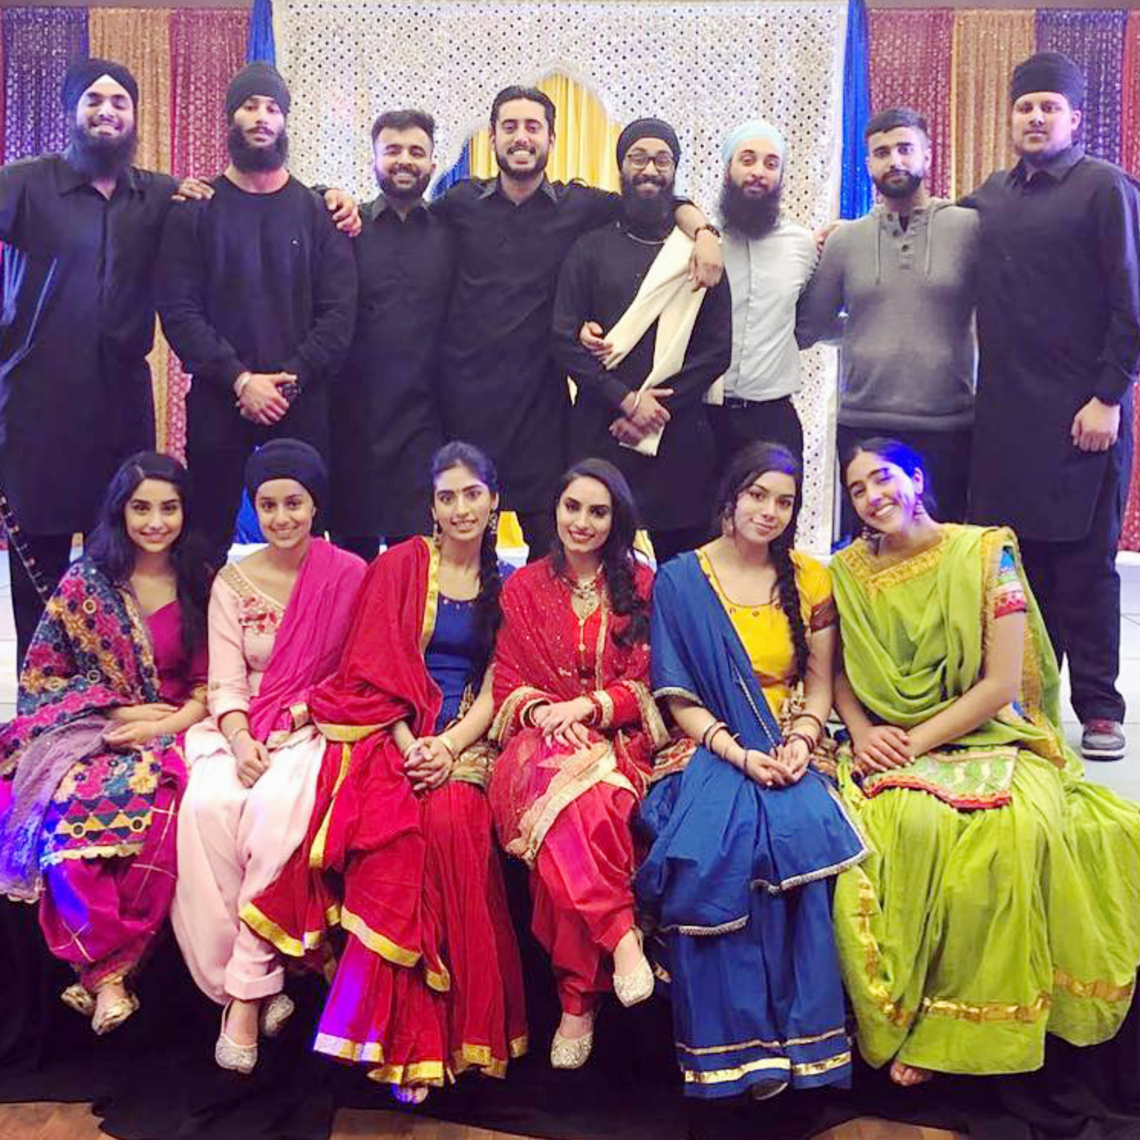 Members of the Sikh Students' Association showcase a Sikh Wedding for Sikh Awareness week at the University of Calgary. They are wearing dress clothes and ghaghra, or traditional Punjabi wear